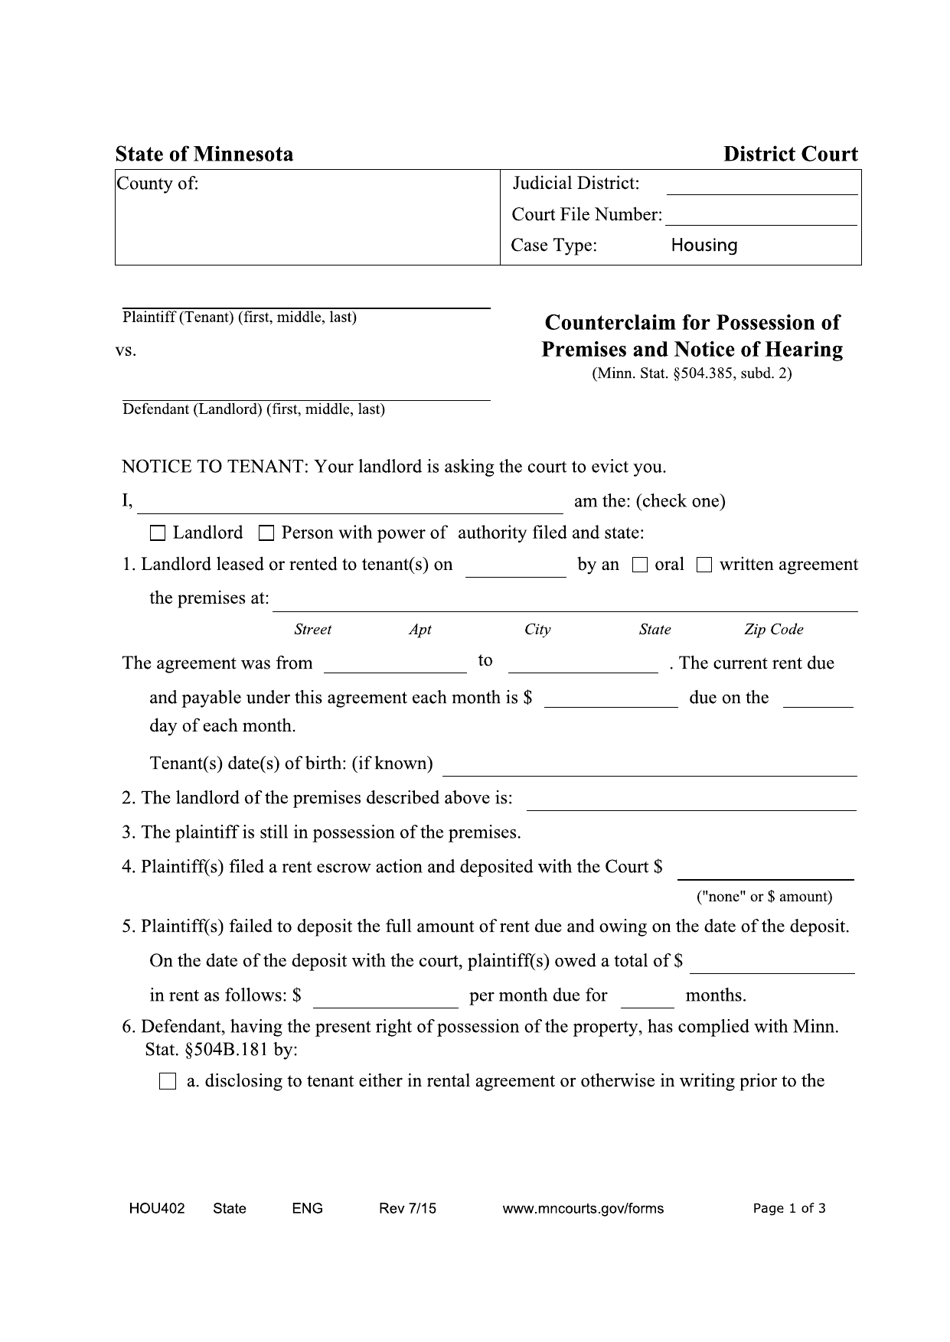 Form HOU402 Counterclaim for Possession of Premises and Notice of Hearing - Minnesota, Page 1